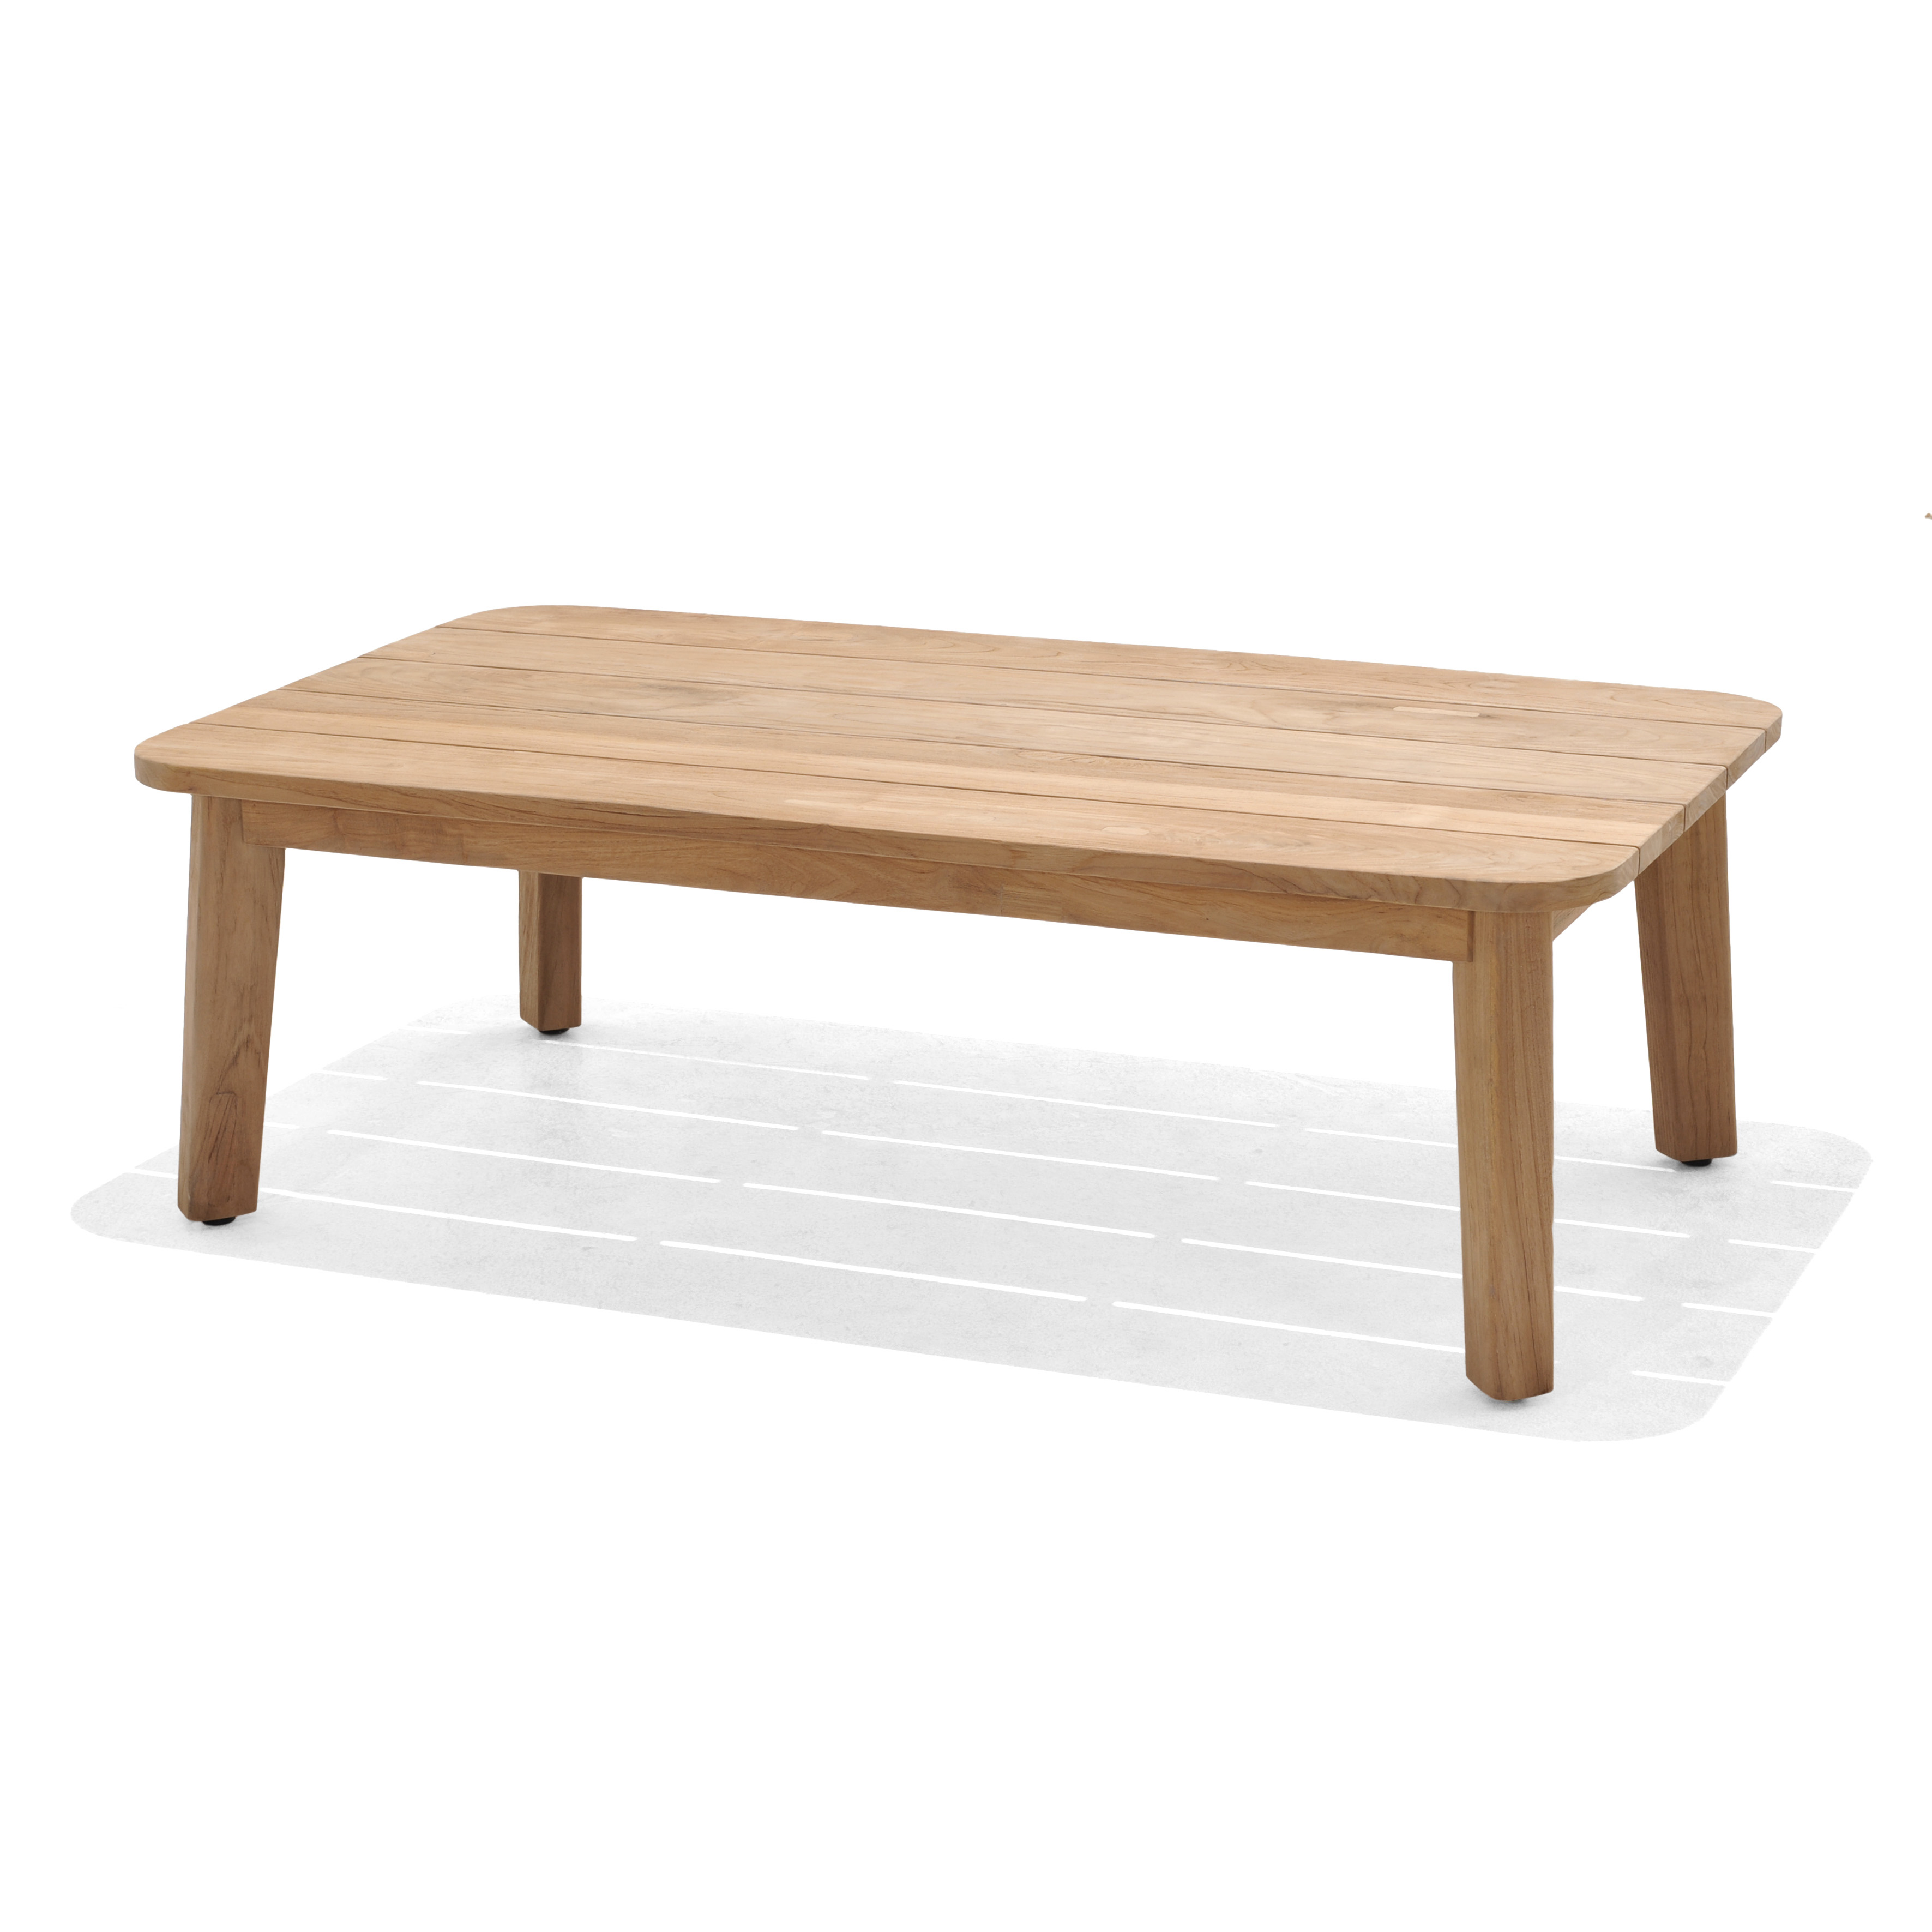 Bahamas Teak Coffee Table, made from recycled FSC certified wood